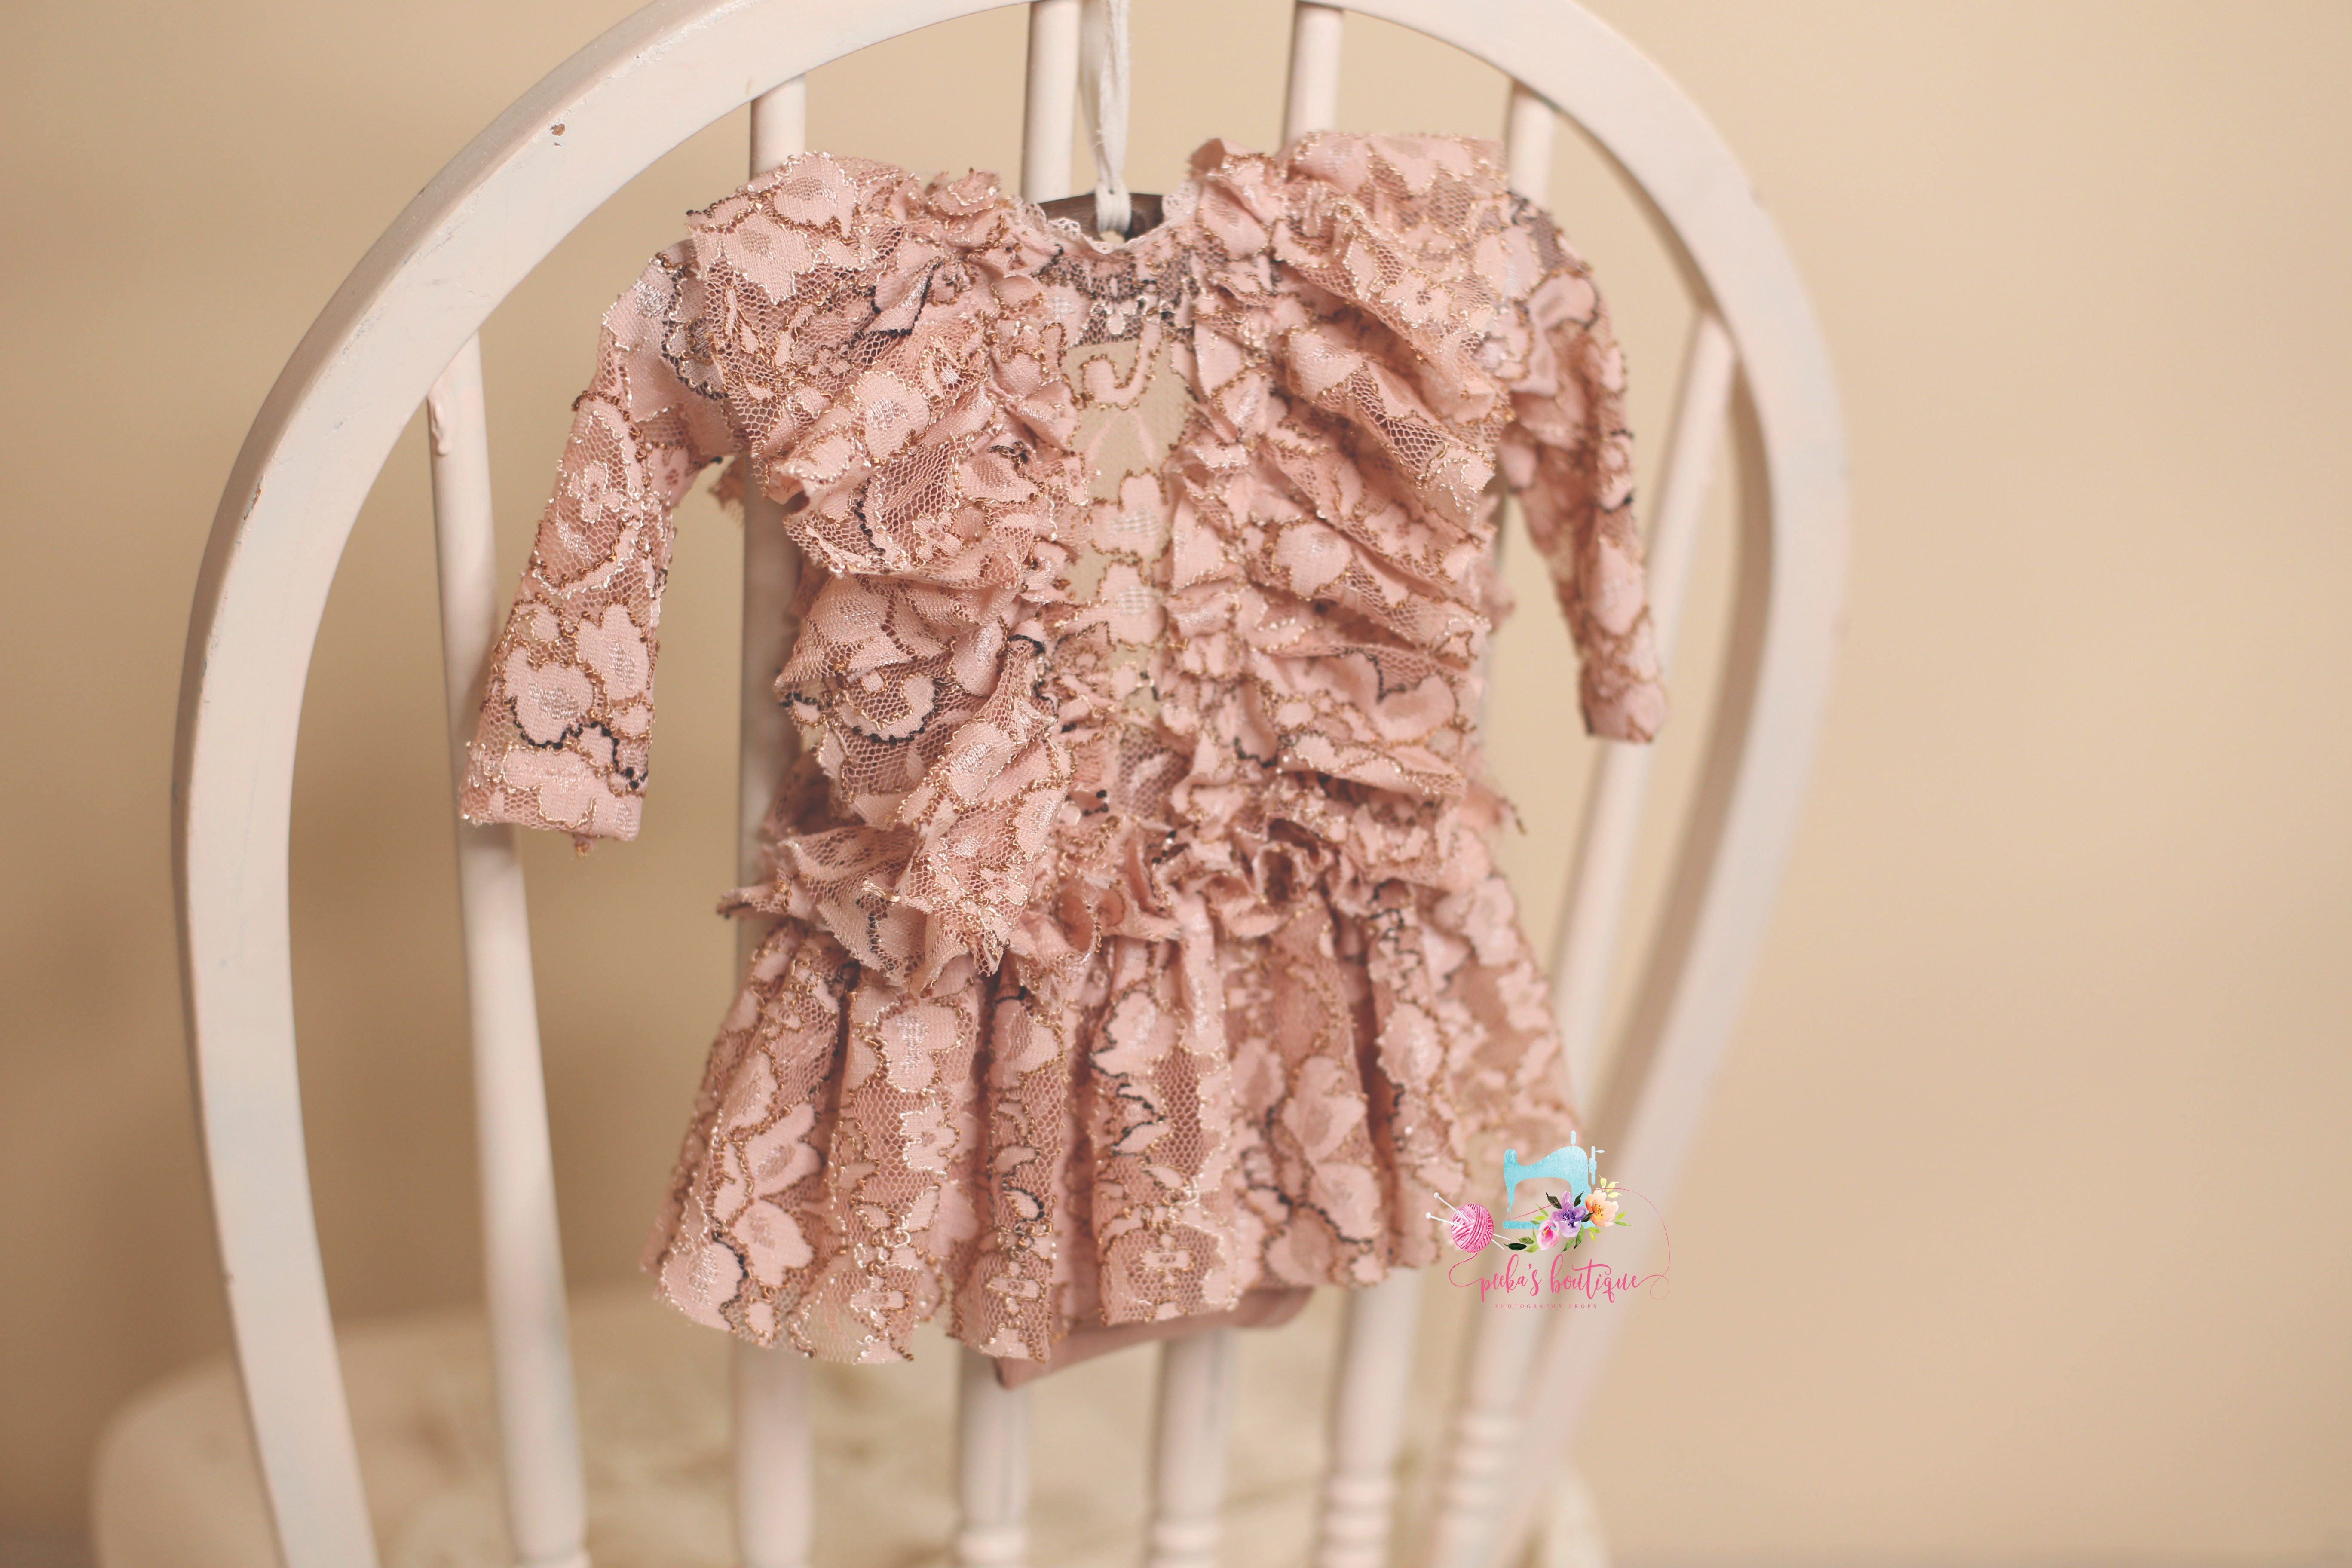 Lacy Anna Flutter Romper- Newborn or Sitter Size- Peaches- MADE TO ORDER